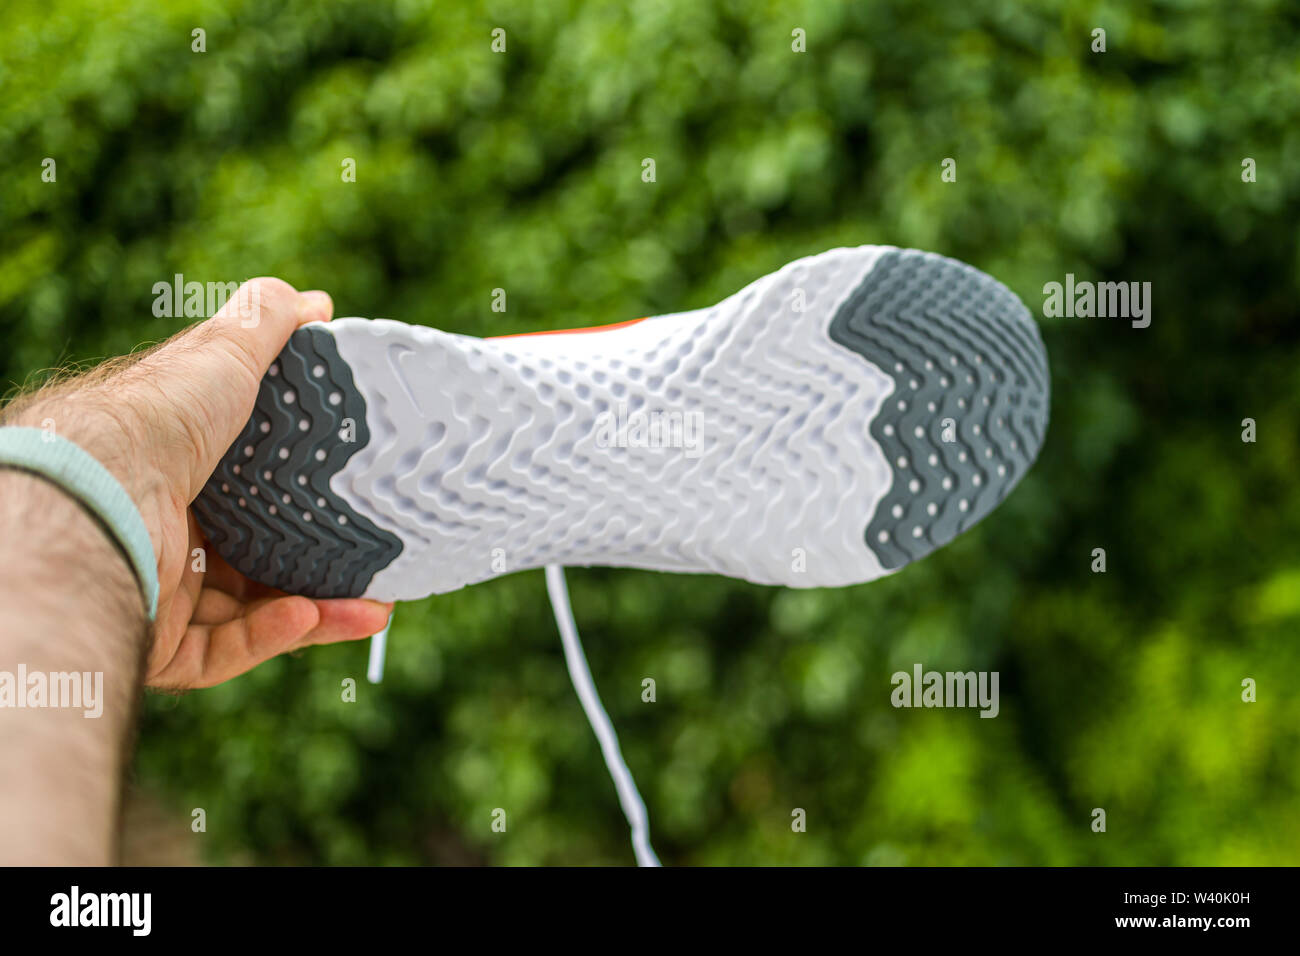 Paris, France - Jul 8, 2019: Athlete man hand holding presenting new  running shoes Nike Epic React Flyknit 2 special sole with carbon insert  Stock Photo - Alamy